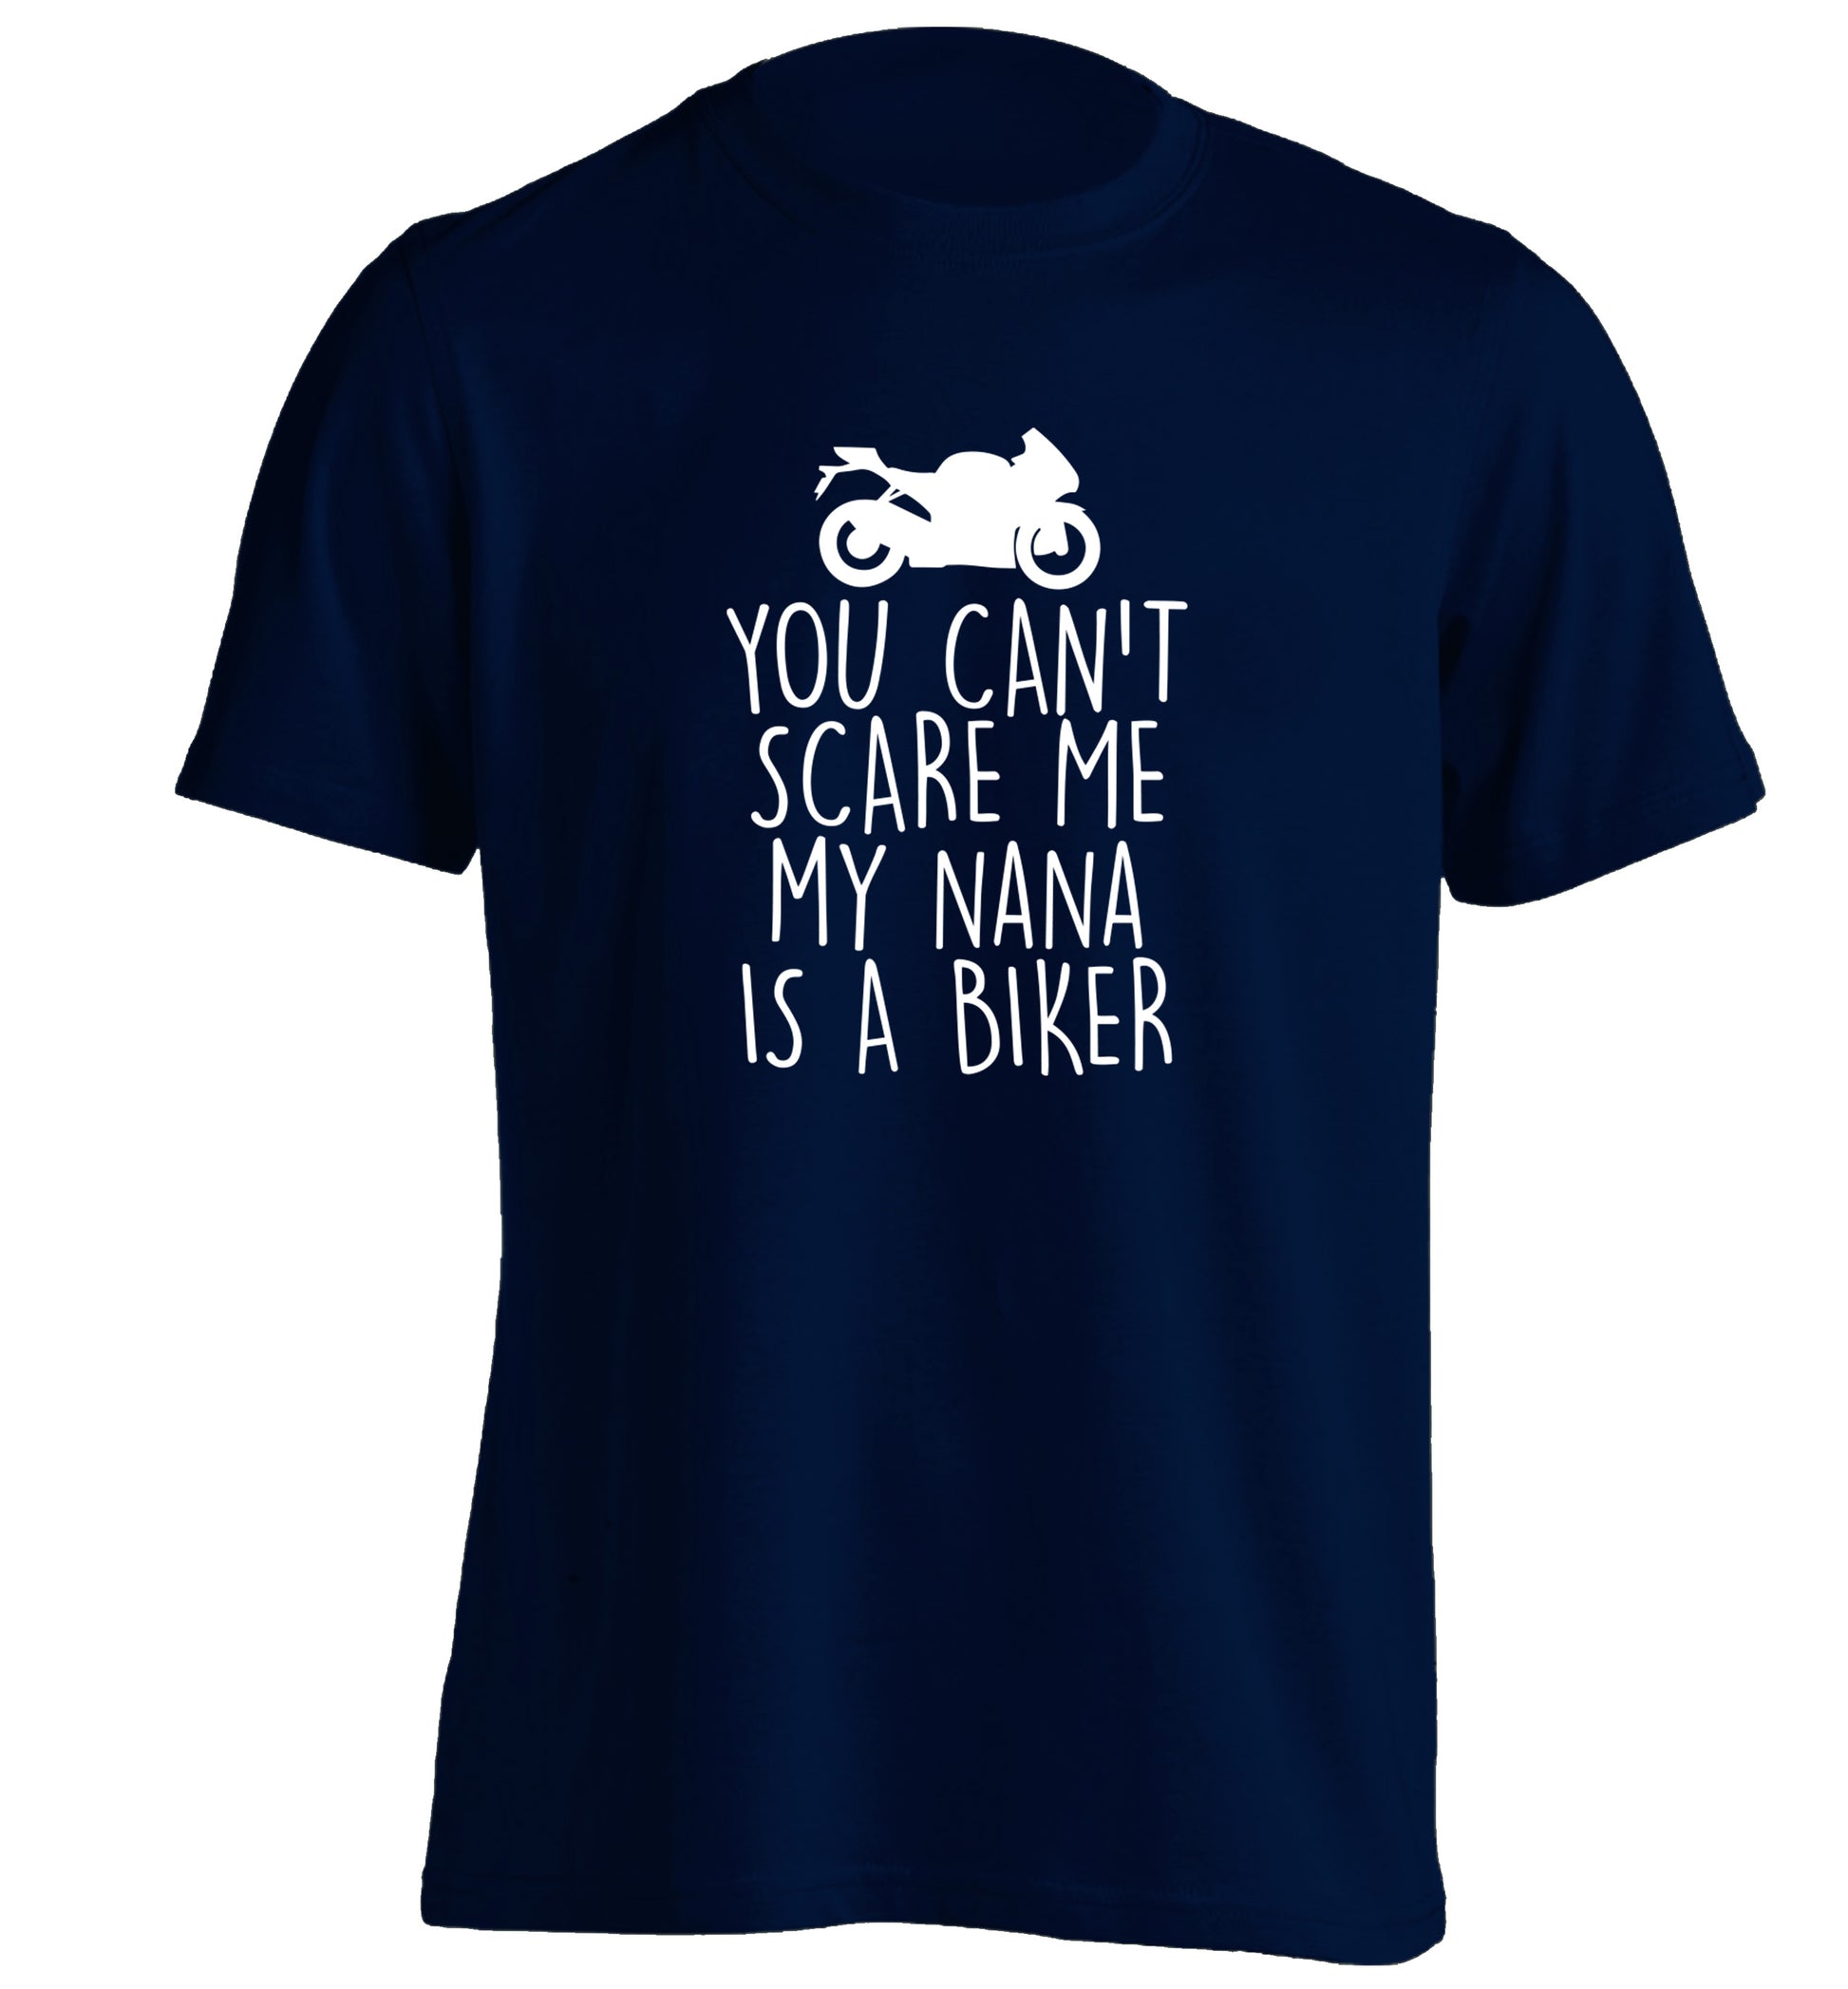 You can't scare me my nana is a biker adults unisex navy Tshirt 2XL